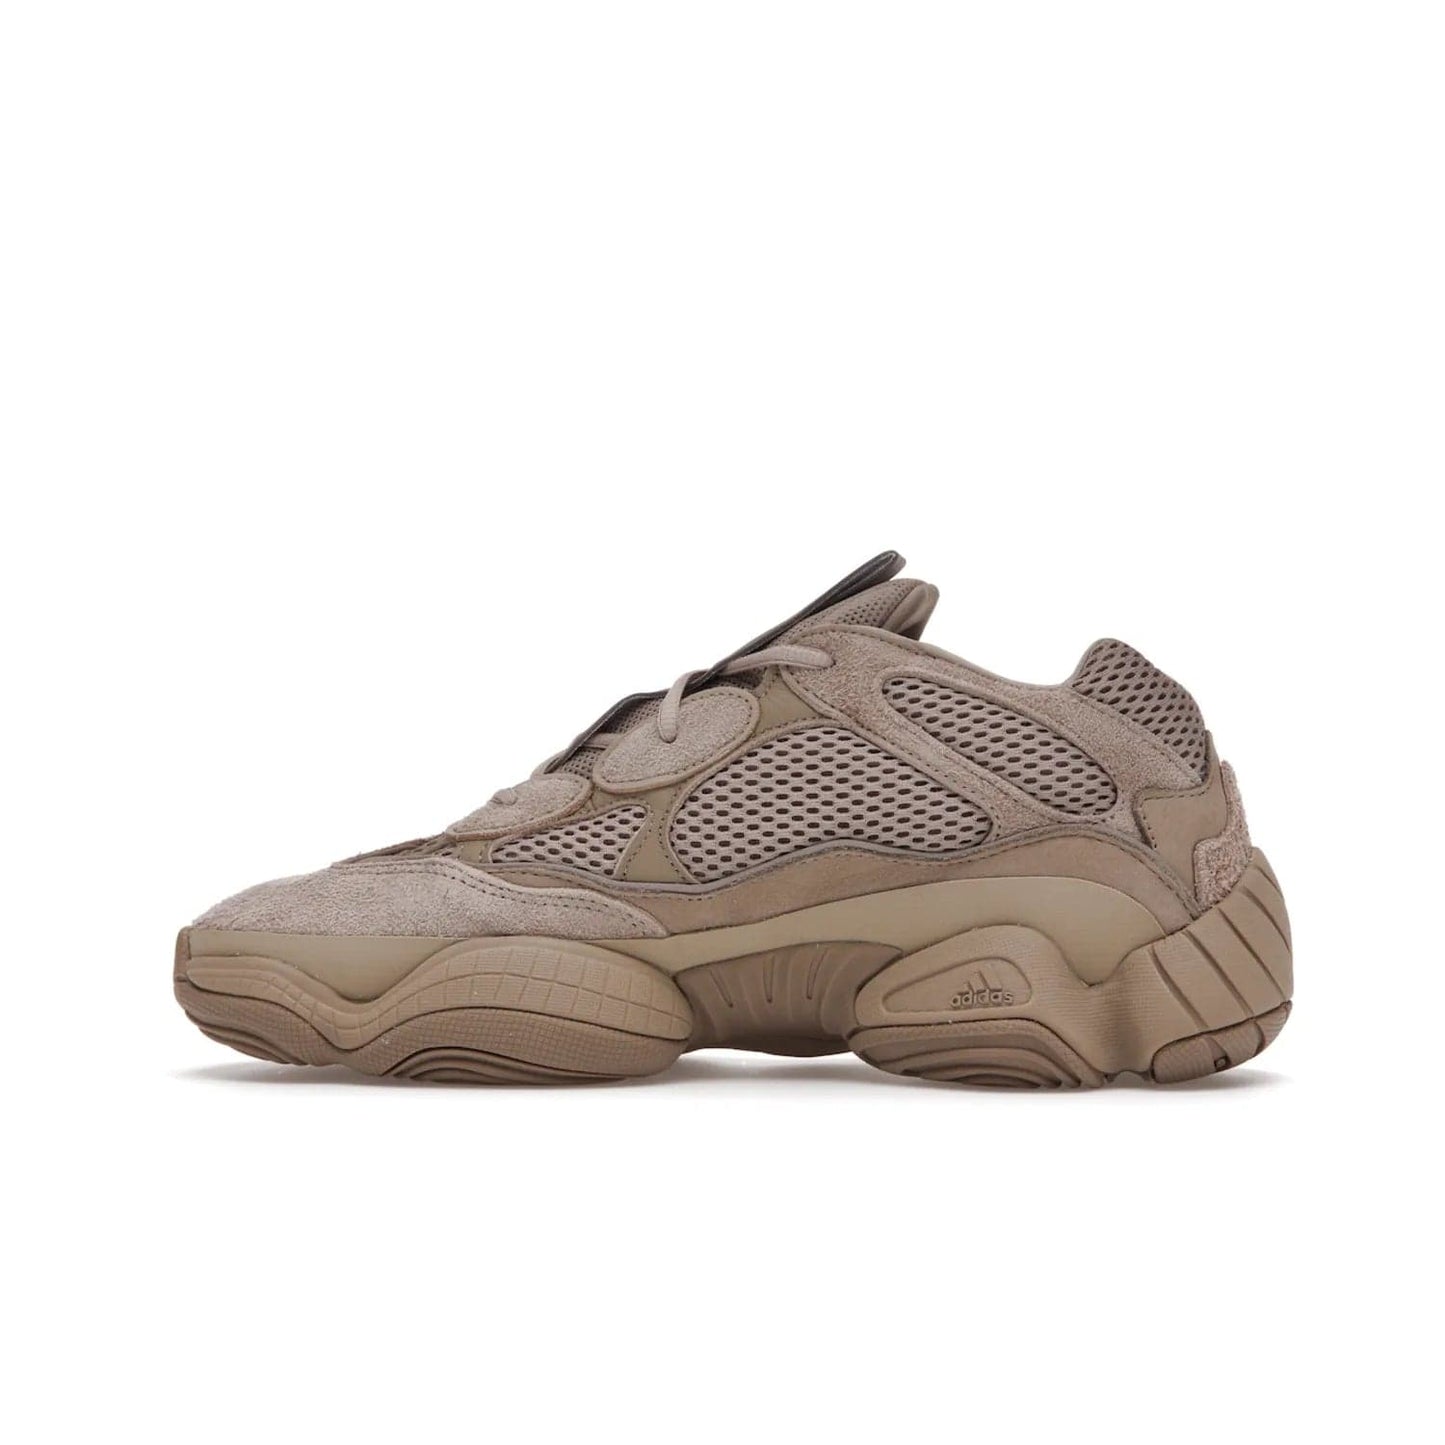 adidas Yeezy 500 Taupe Light - Image 20 - Only at www.BallersClubKickz.com - The adidas Yeezy 500 Taupe Light combines mesh, leather, and suede, with a durable adiPRENE sole for an eye-catching accessory. Reflective piping adds the perfect finishing touches to this unique silhouette. Ideal for any wardrobe, releasing in June 2021.